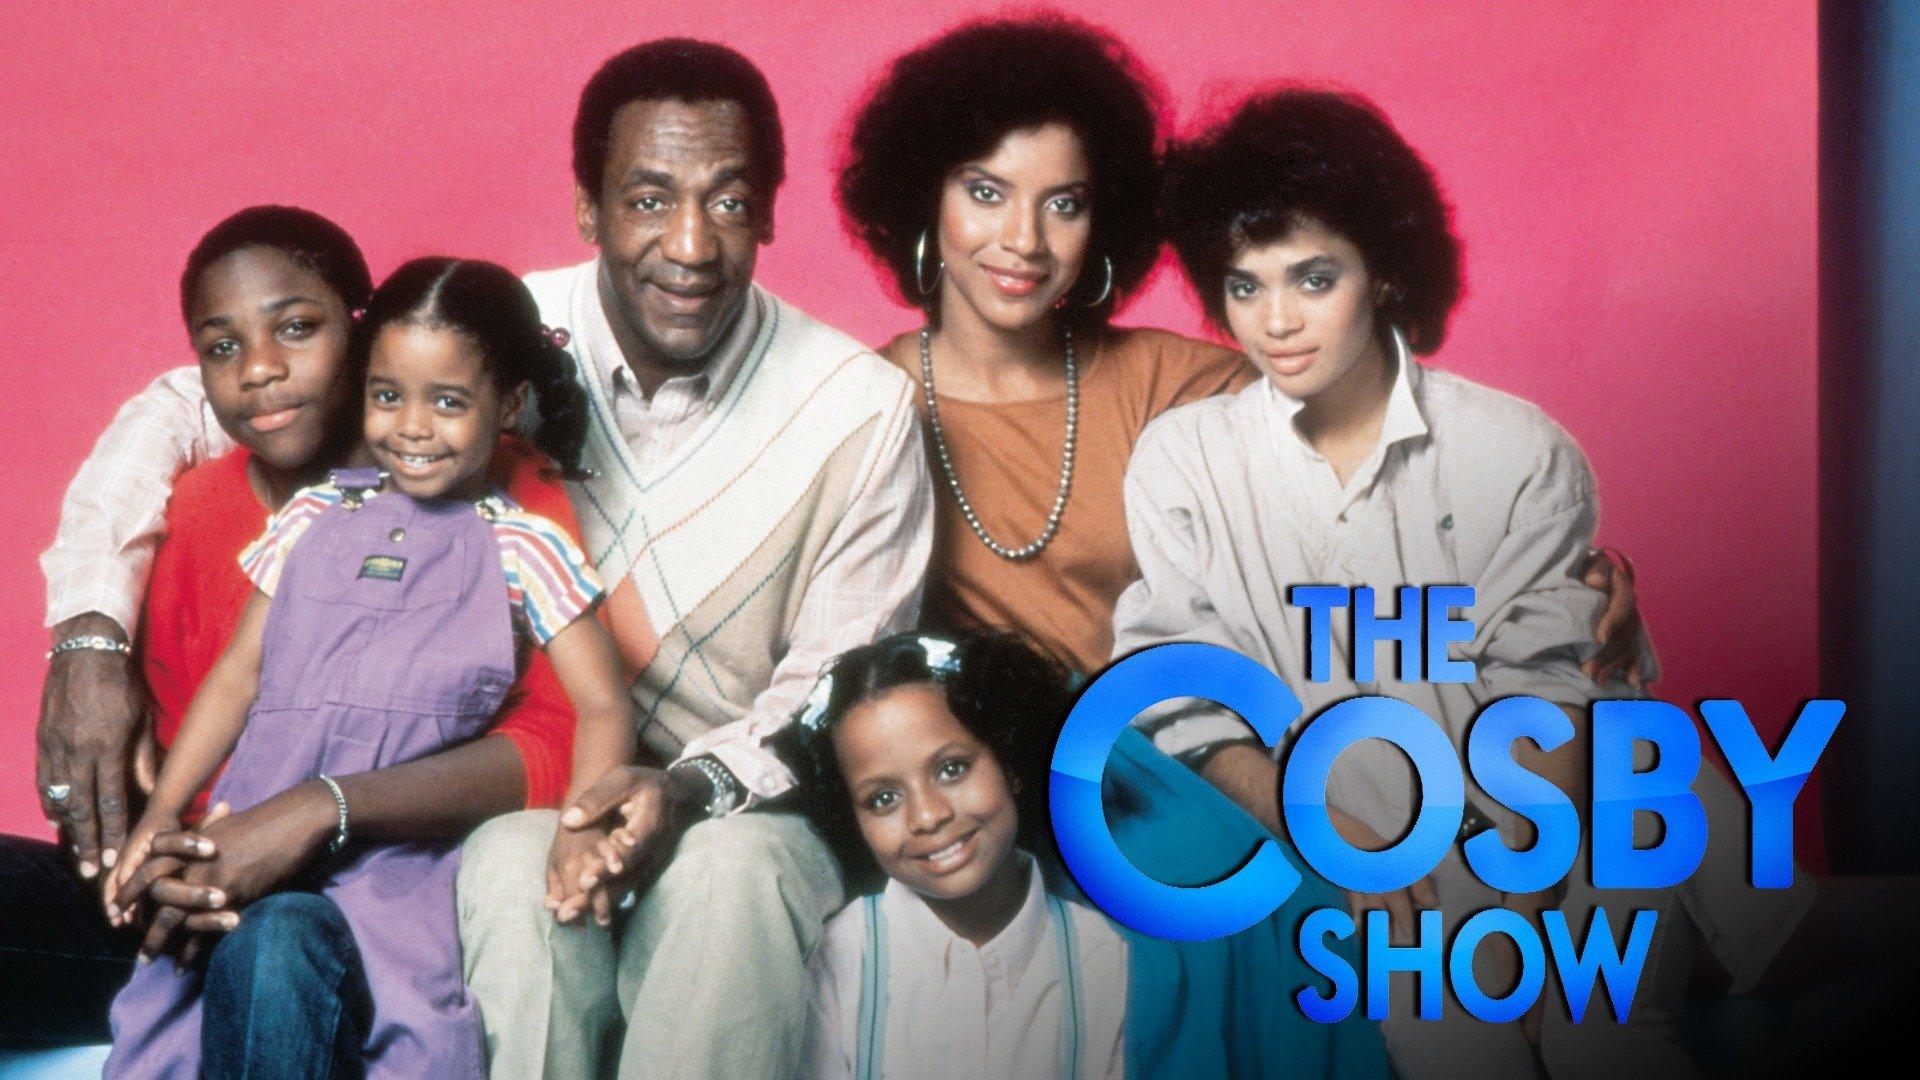 Stream The Cosby Show 7Day Free Trial on Philo